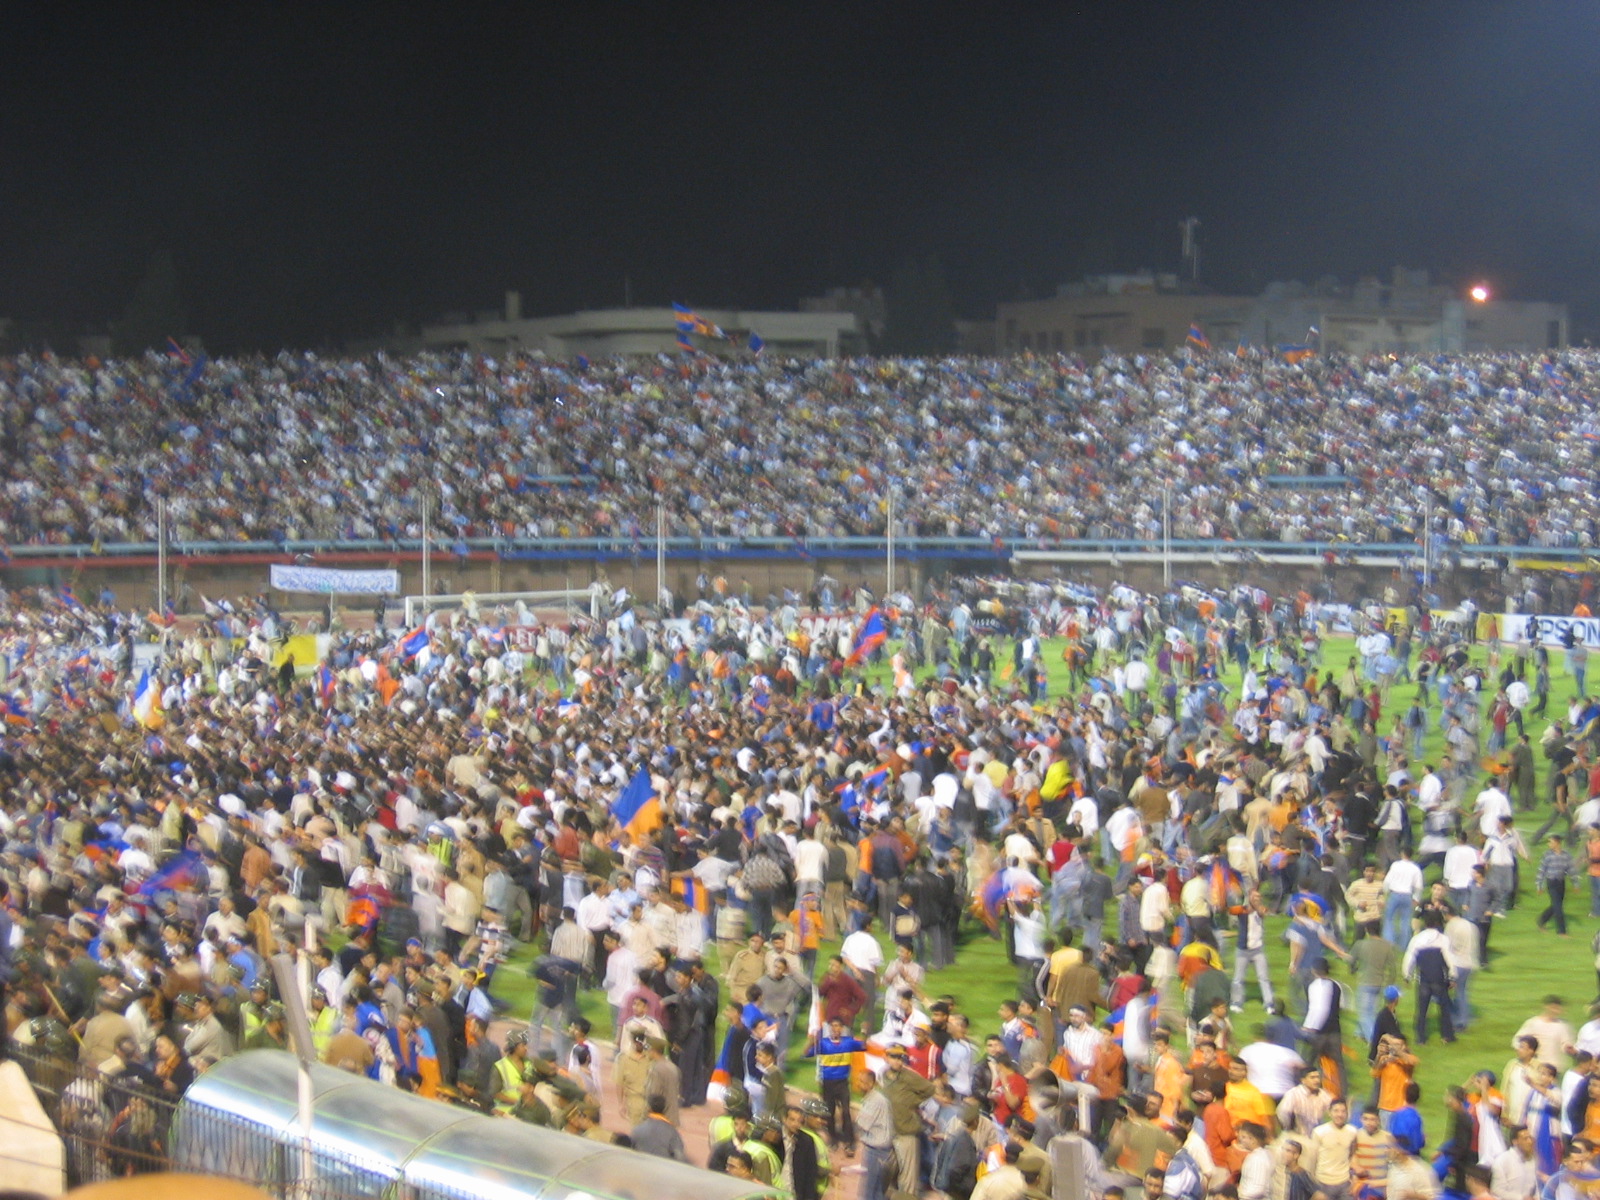 Homs fans rushing the field